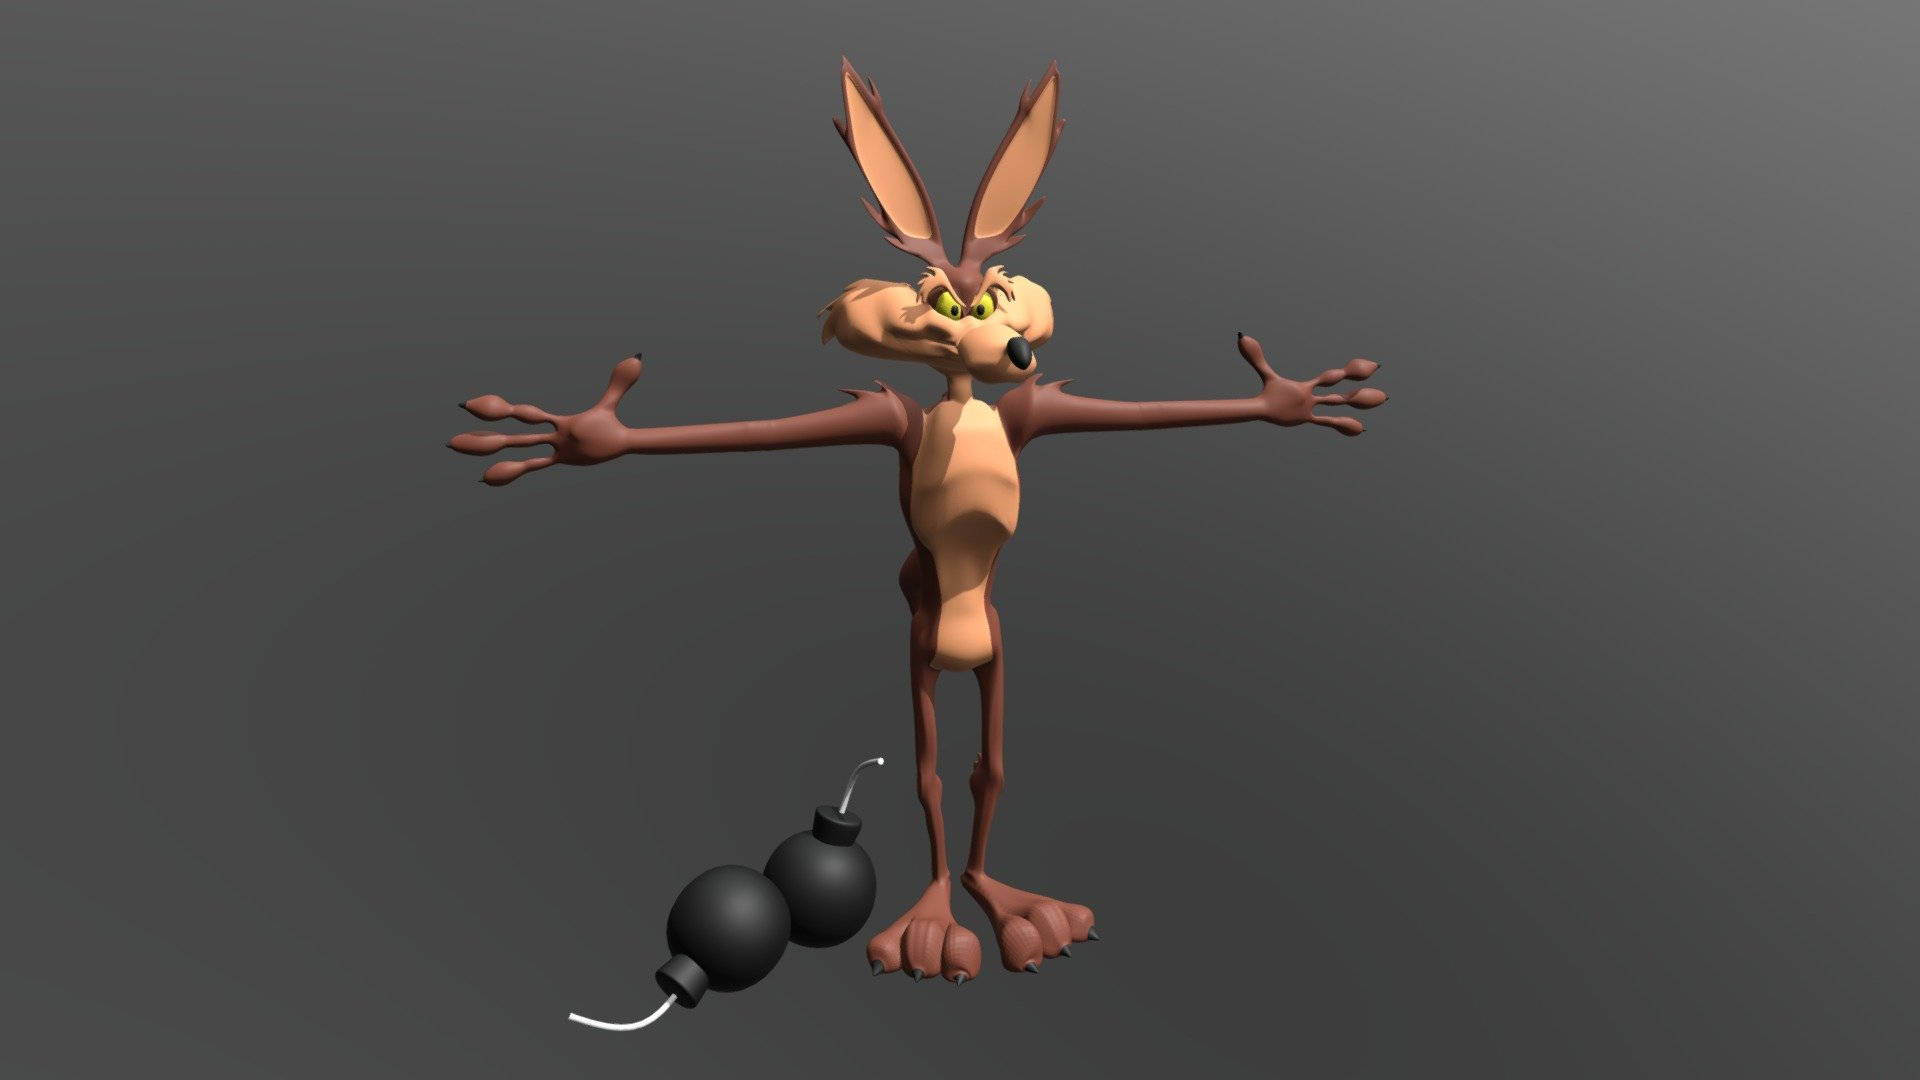 Wile E Coyote With Bombs